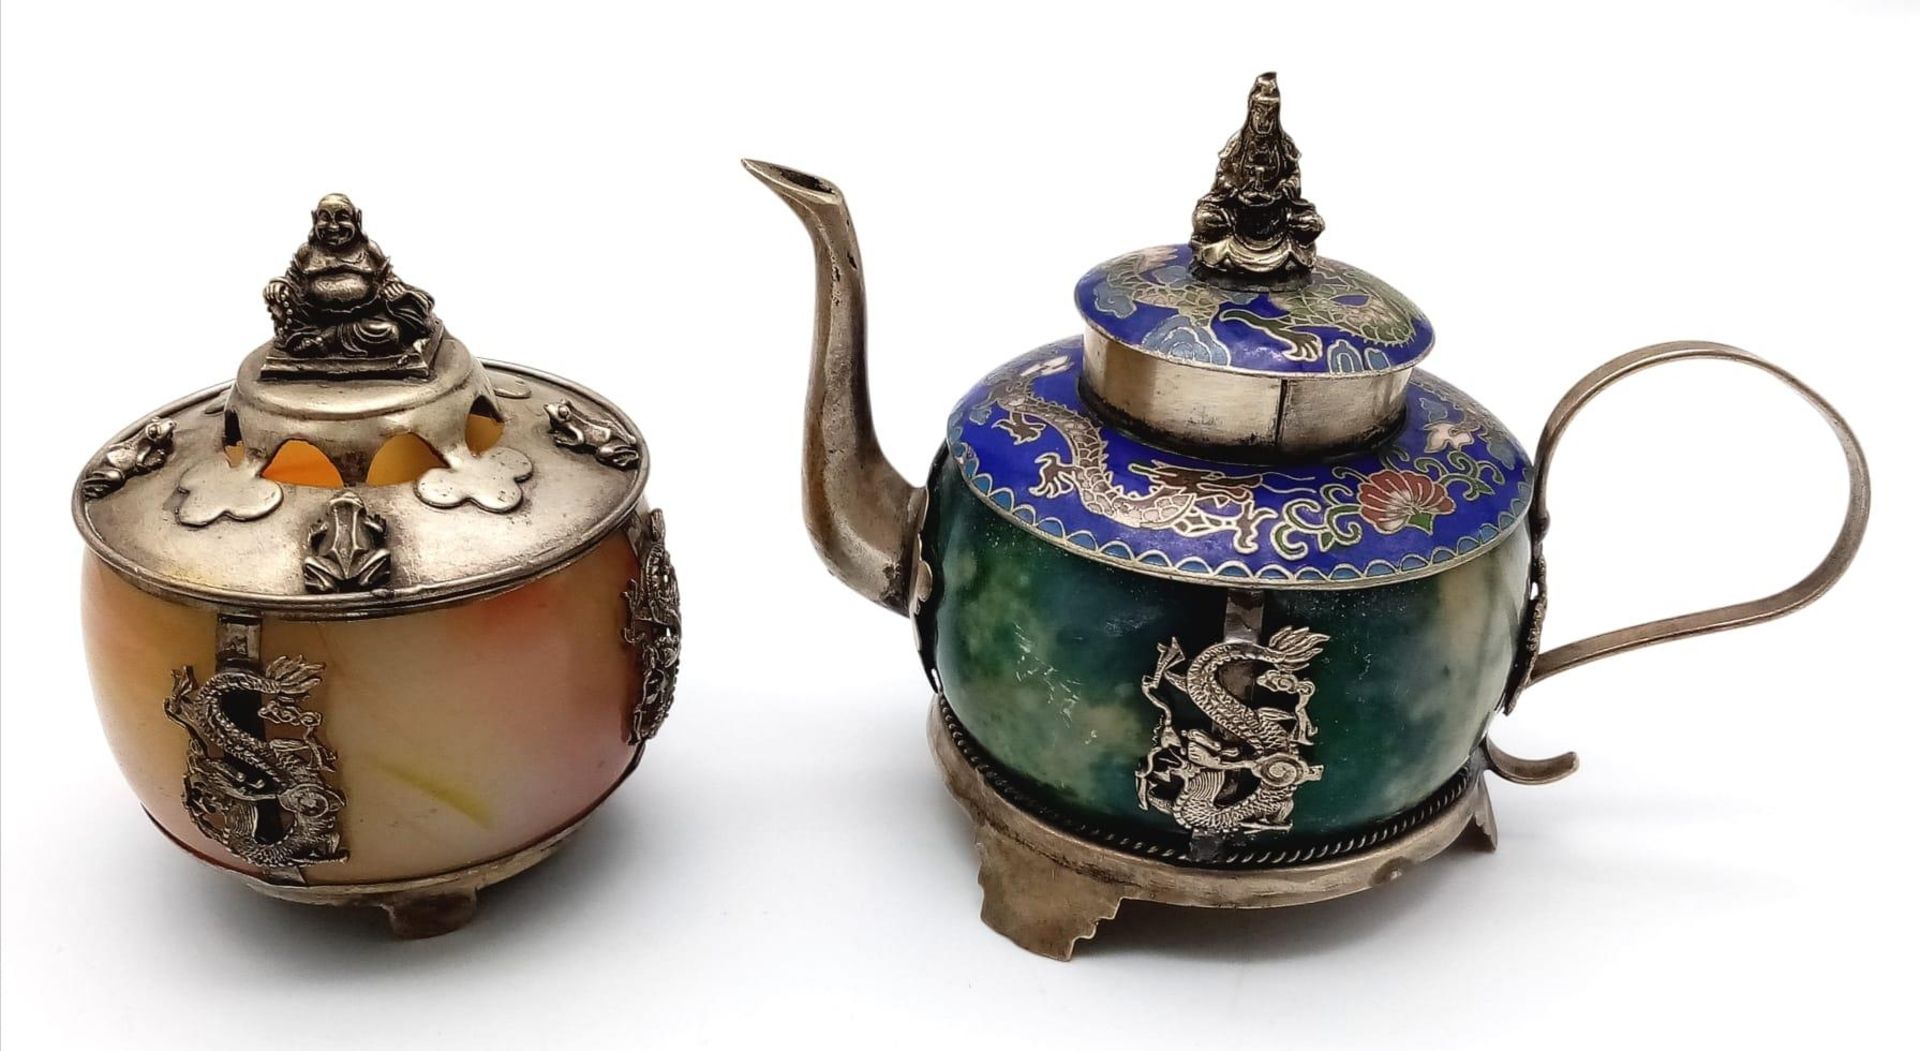 Two Superb Antique Chinese Miniature Teapots (circa 1900) - both on silver mounts hallmarked to